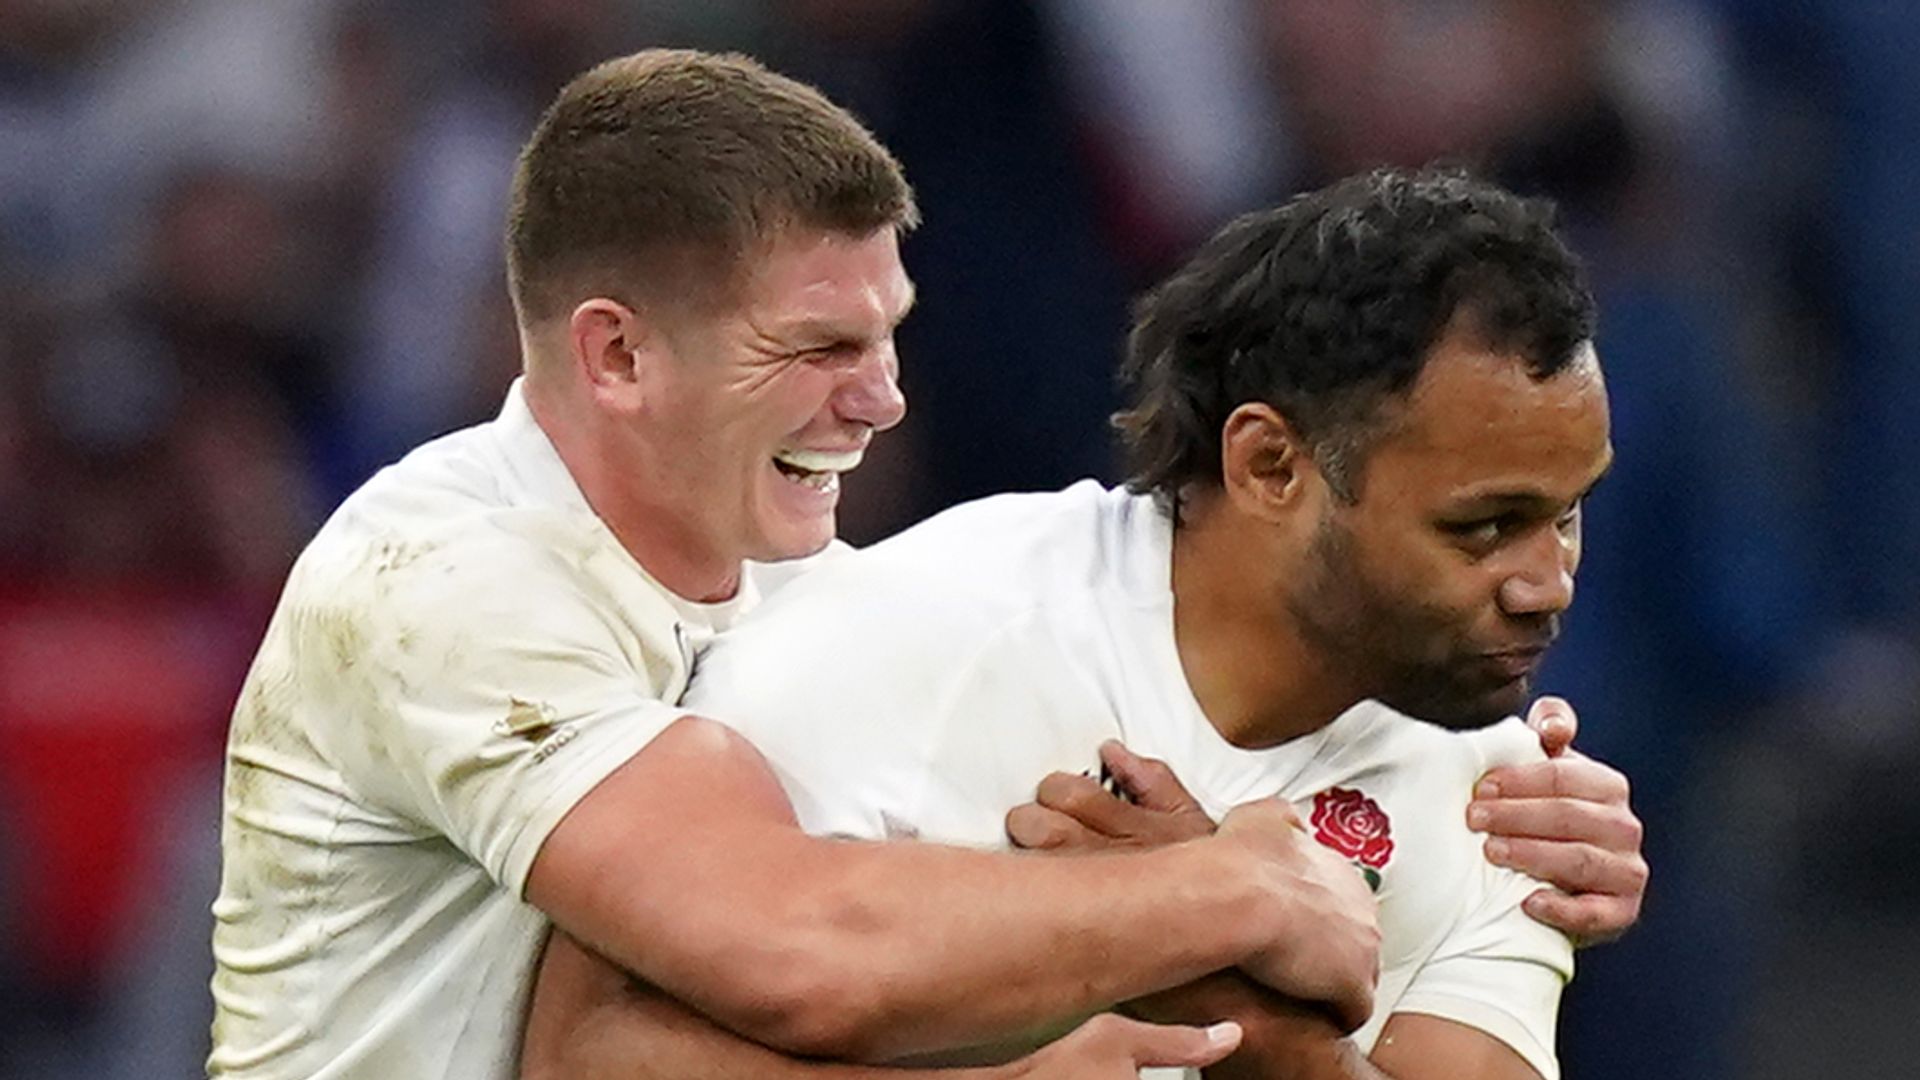 Cautious optimism: Can England cause a World Cup upset?